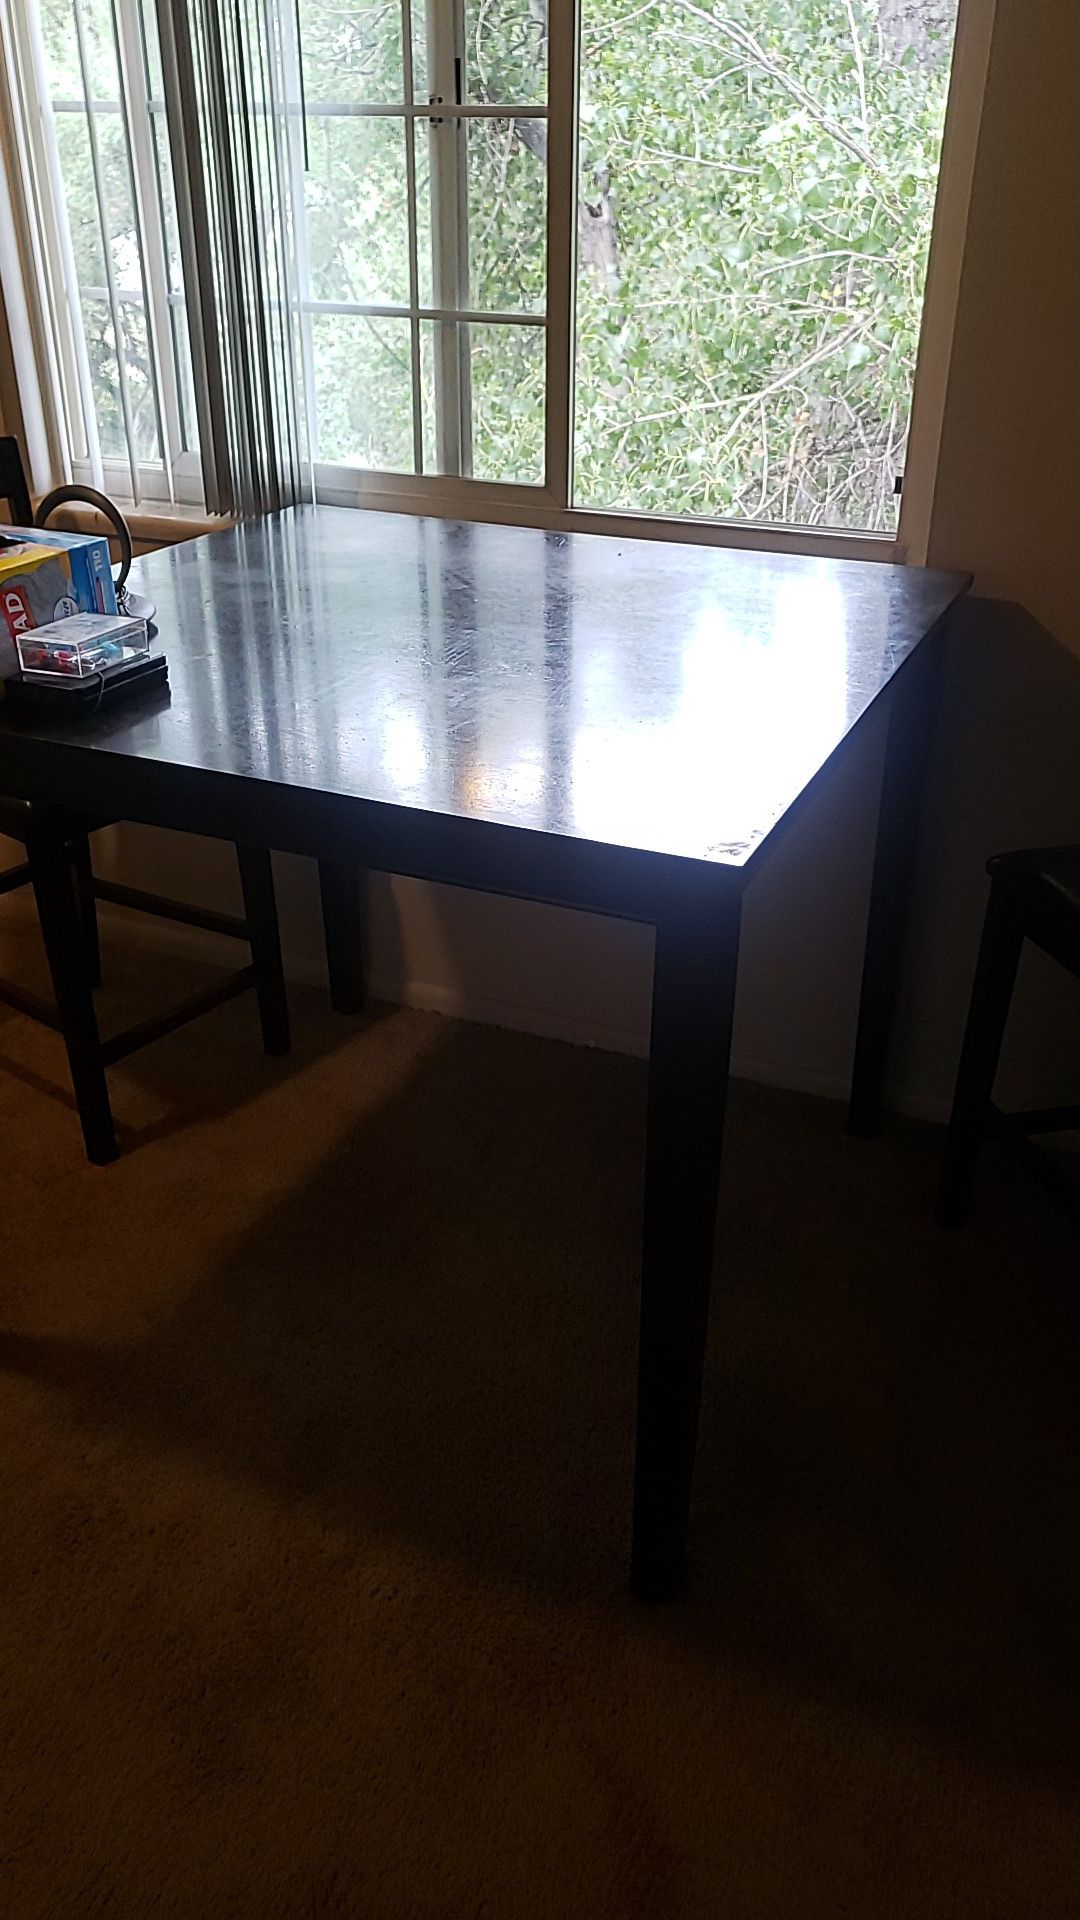 Tall kitchen table with 4 chairs